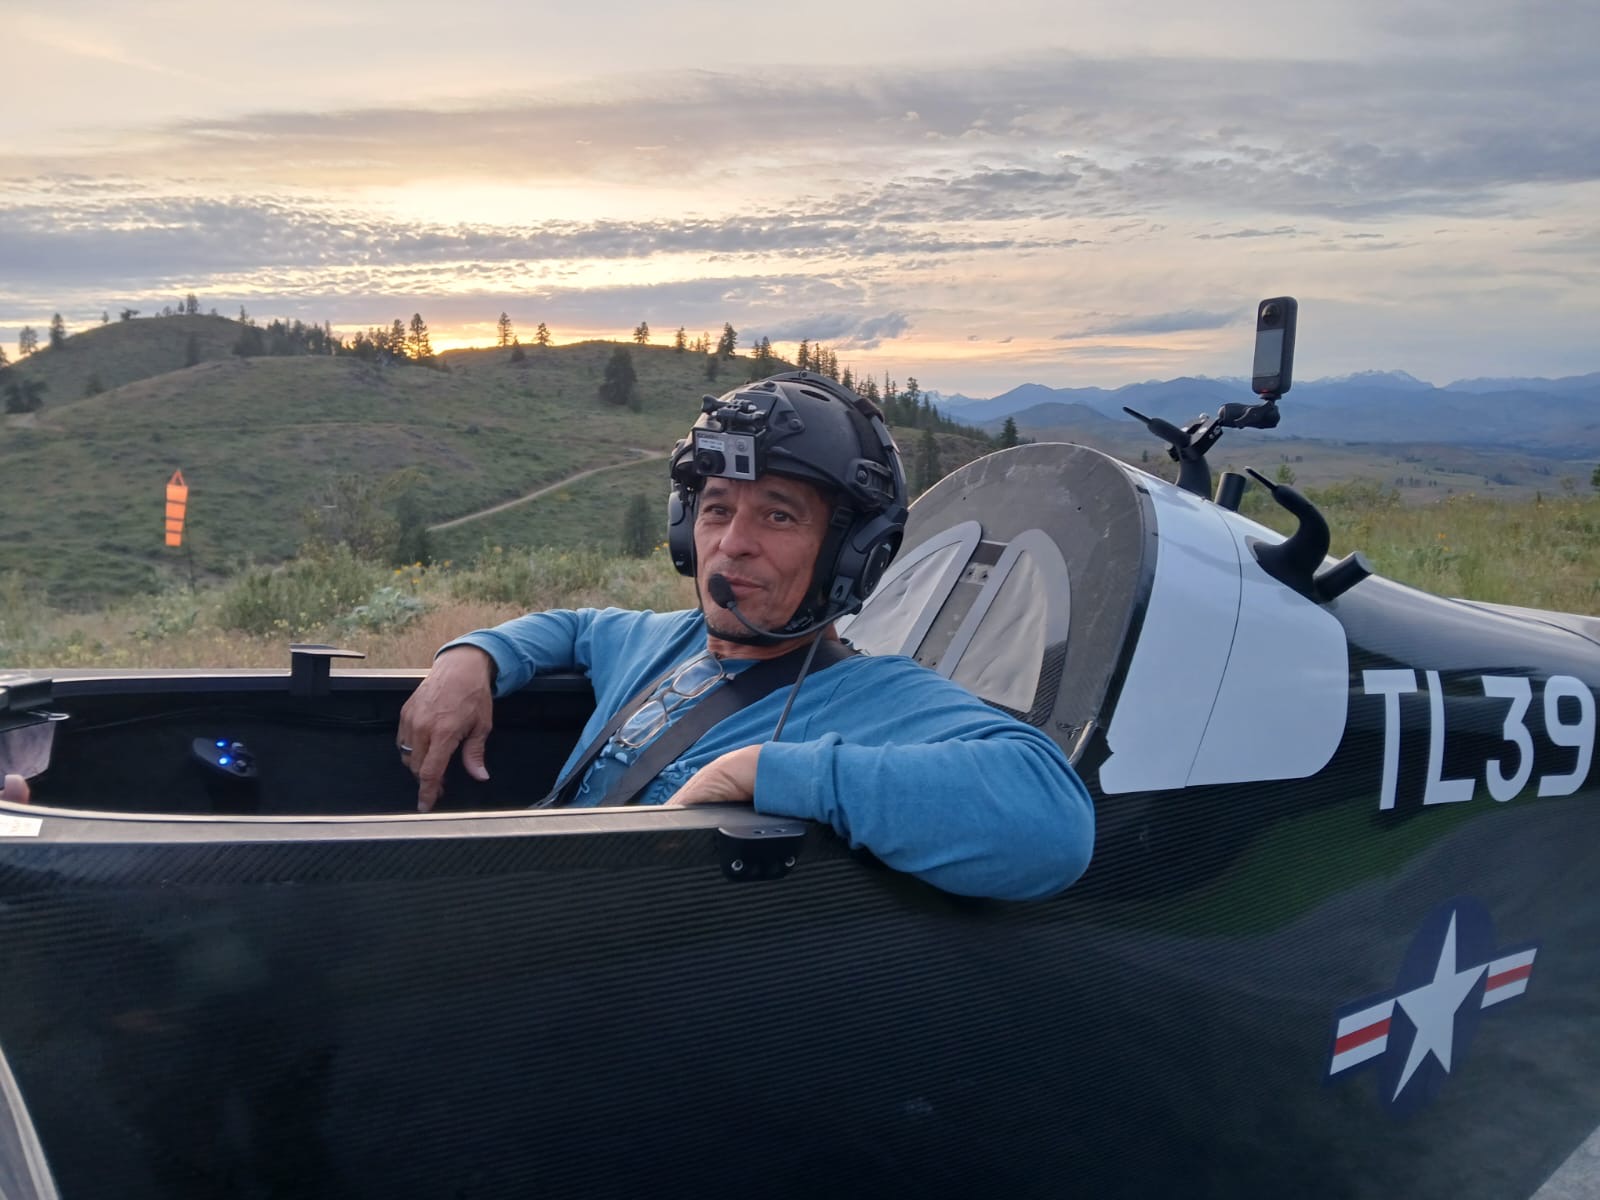 A person wearing a helmet with a mounted camera and headset sits in a black glider cockpit marked with &quot;TL39.&quot; The background shows a hilly, scenic sunset.